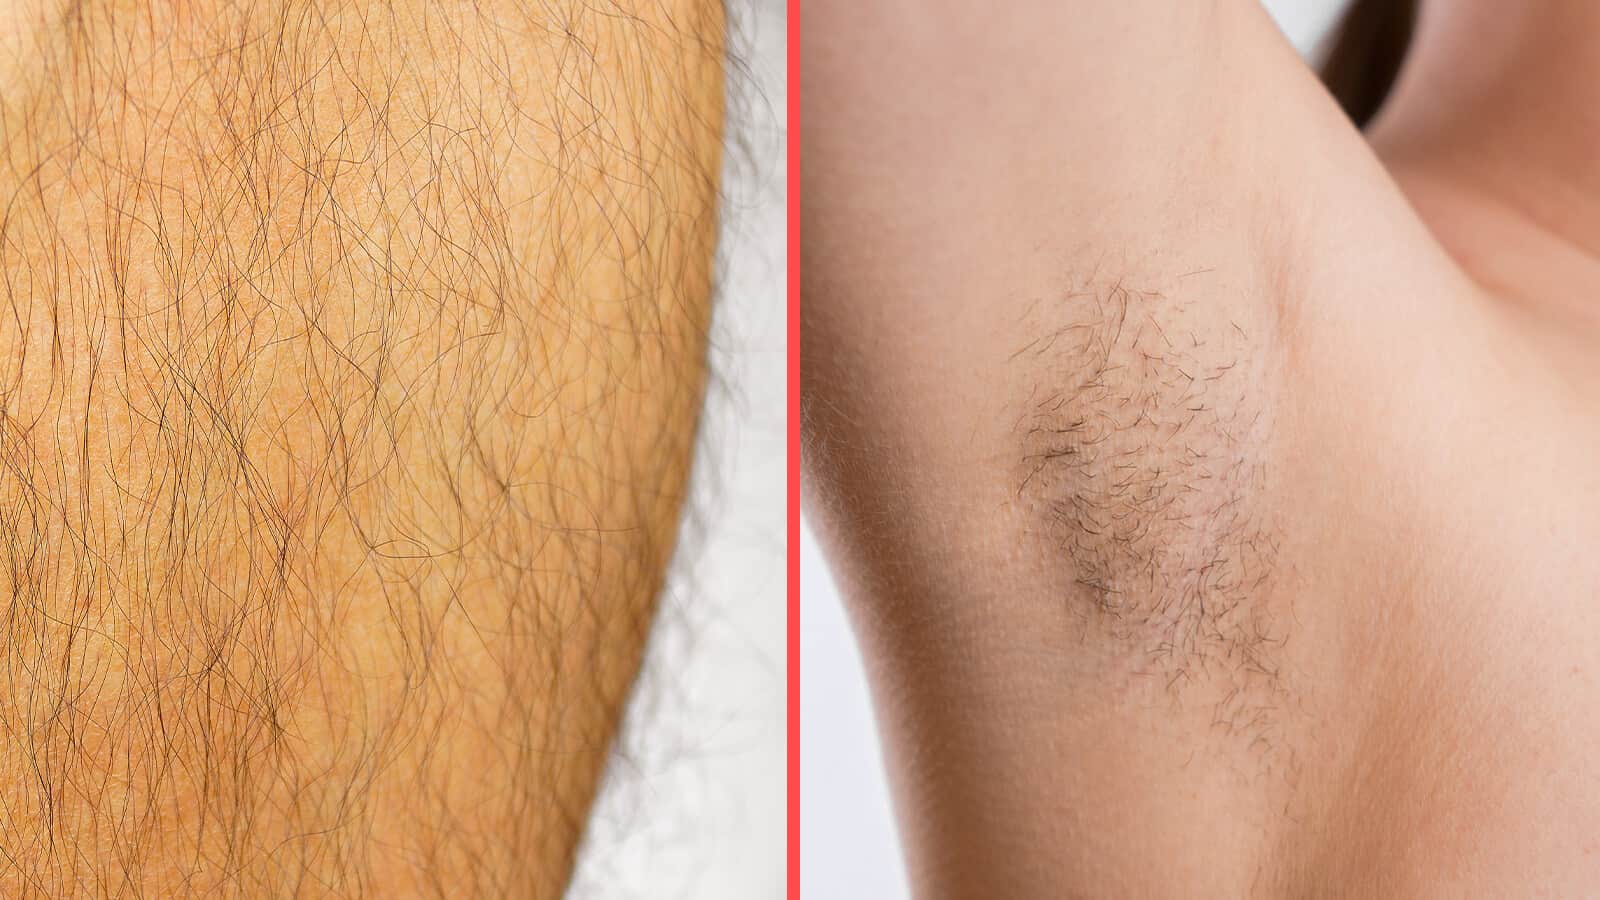 4 Things You Can Learn About Your Health Through Your Body Hair